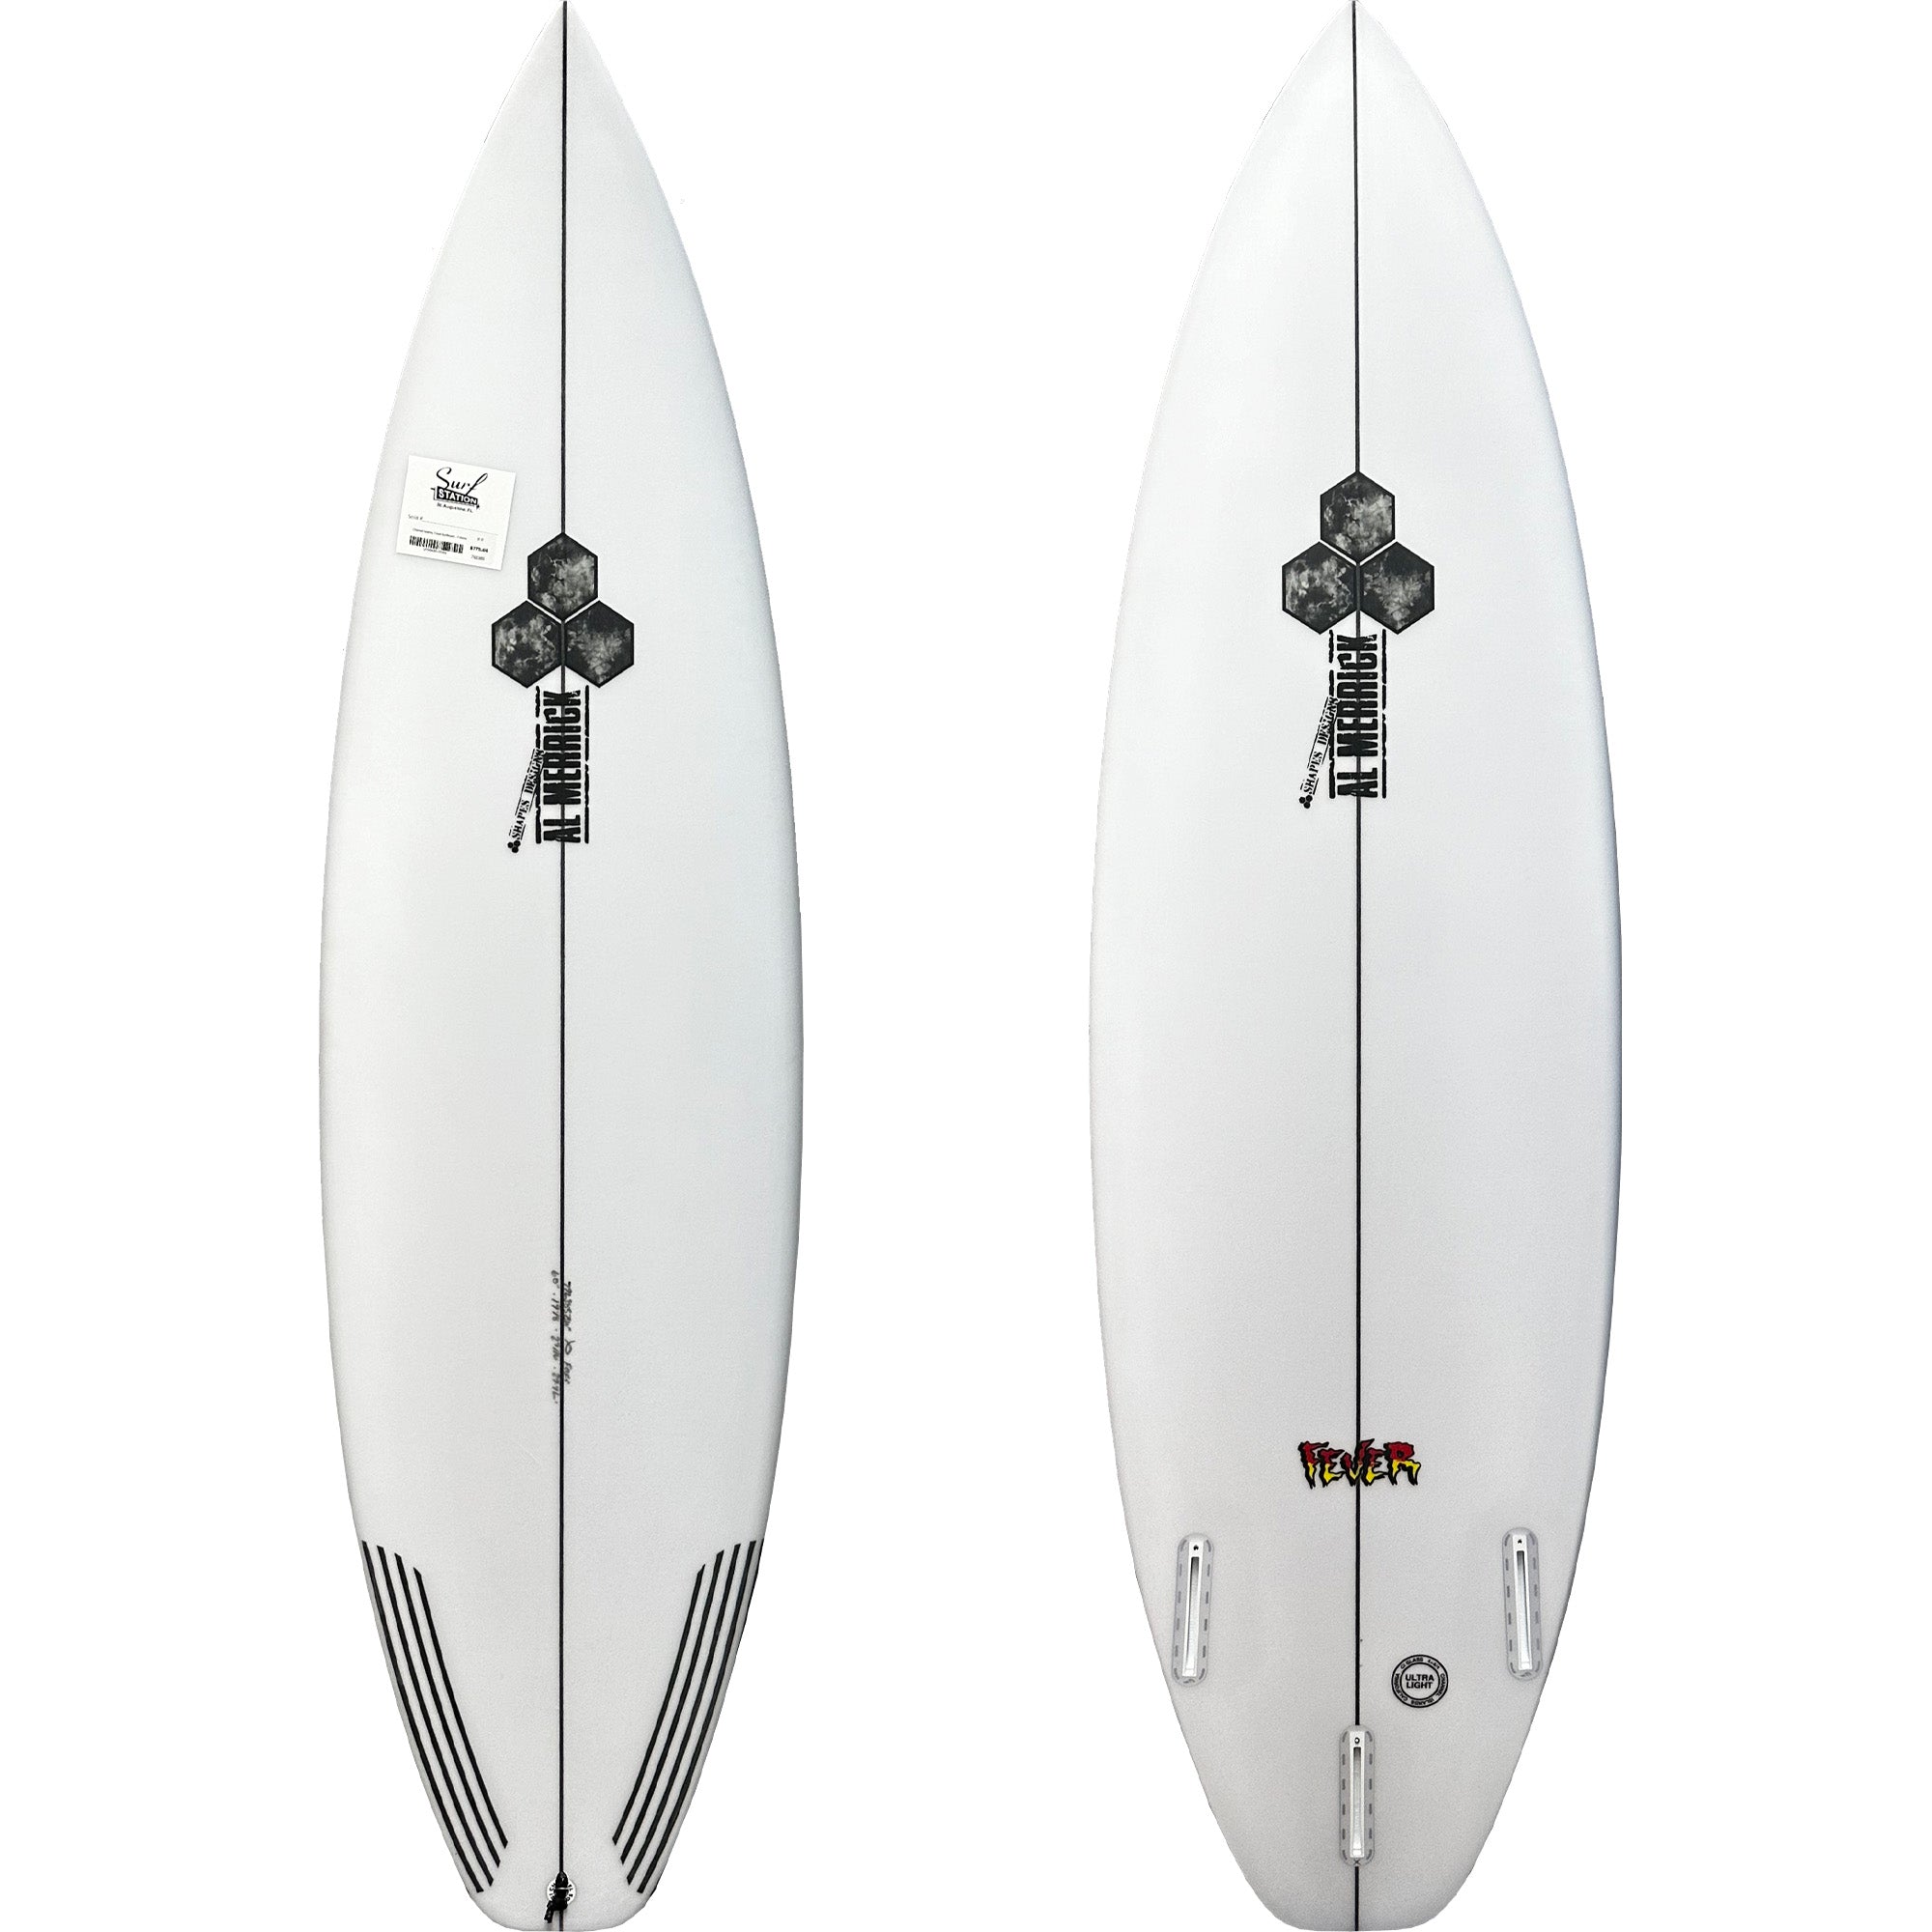 Channel Islands Fever Surfboard - Futures